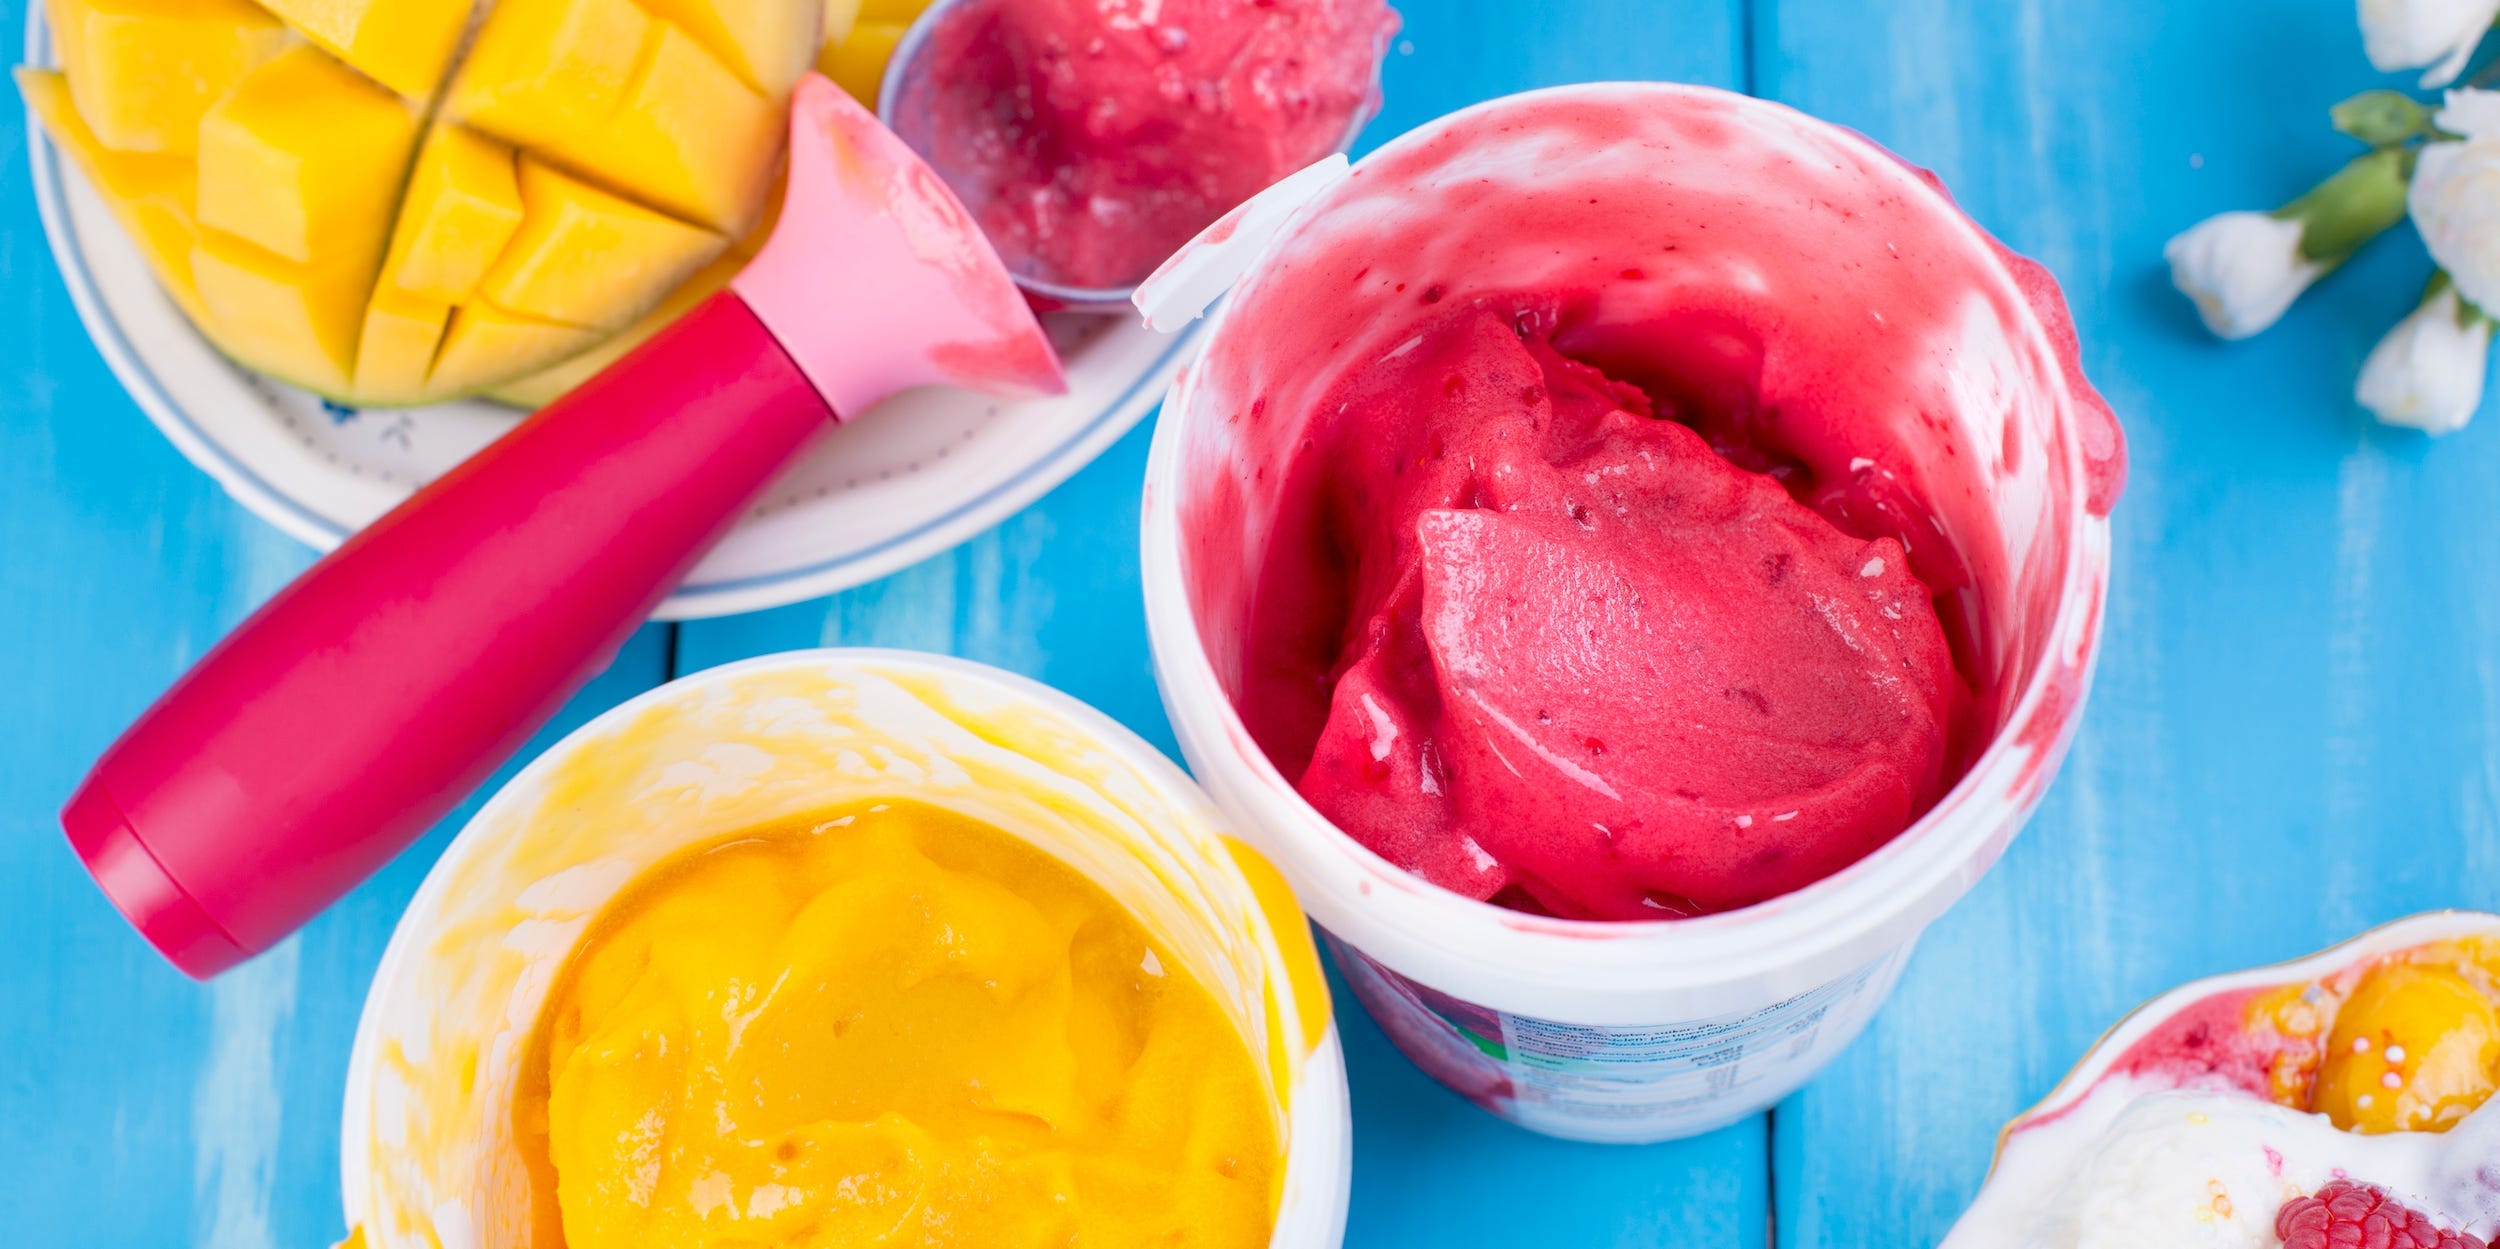 Two open pints of sorbet, one yellow and one pink, sit on a blue table.